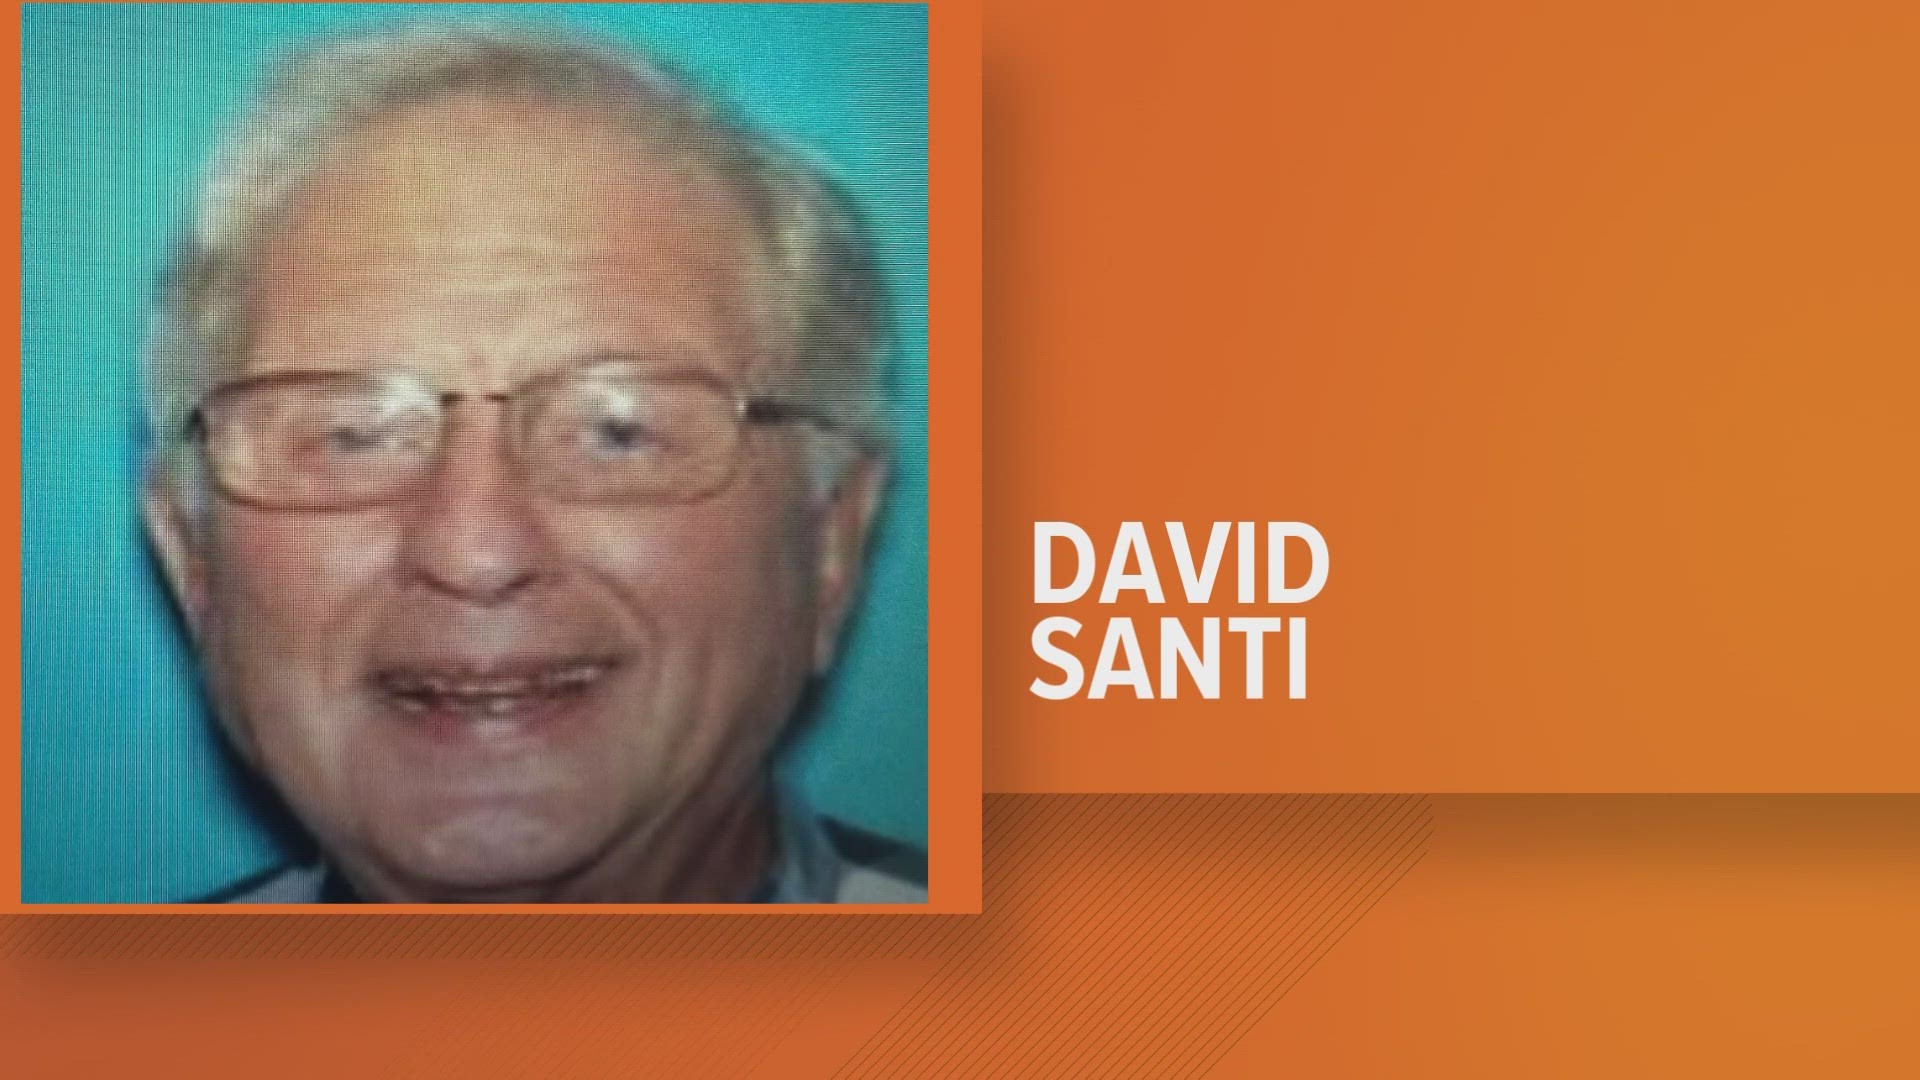 The Knoxville Police Department said David Santi was found late Saturday night.